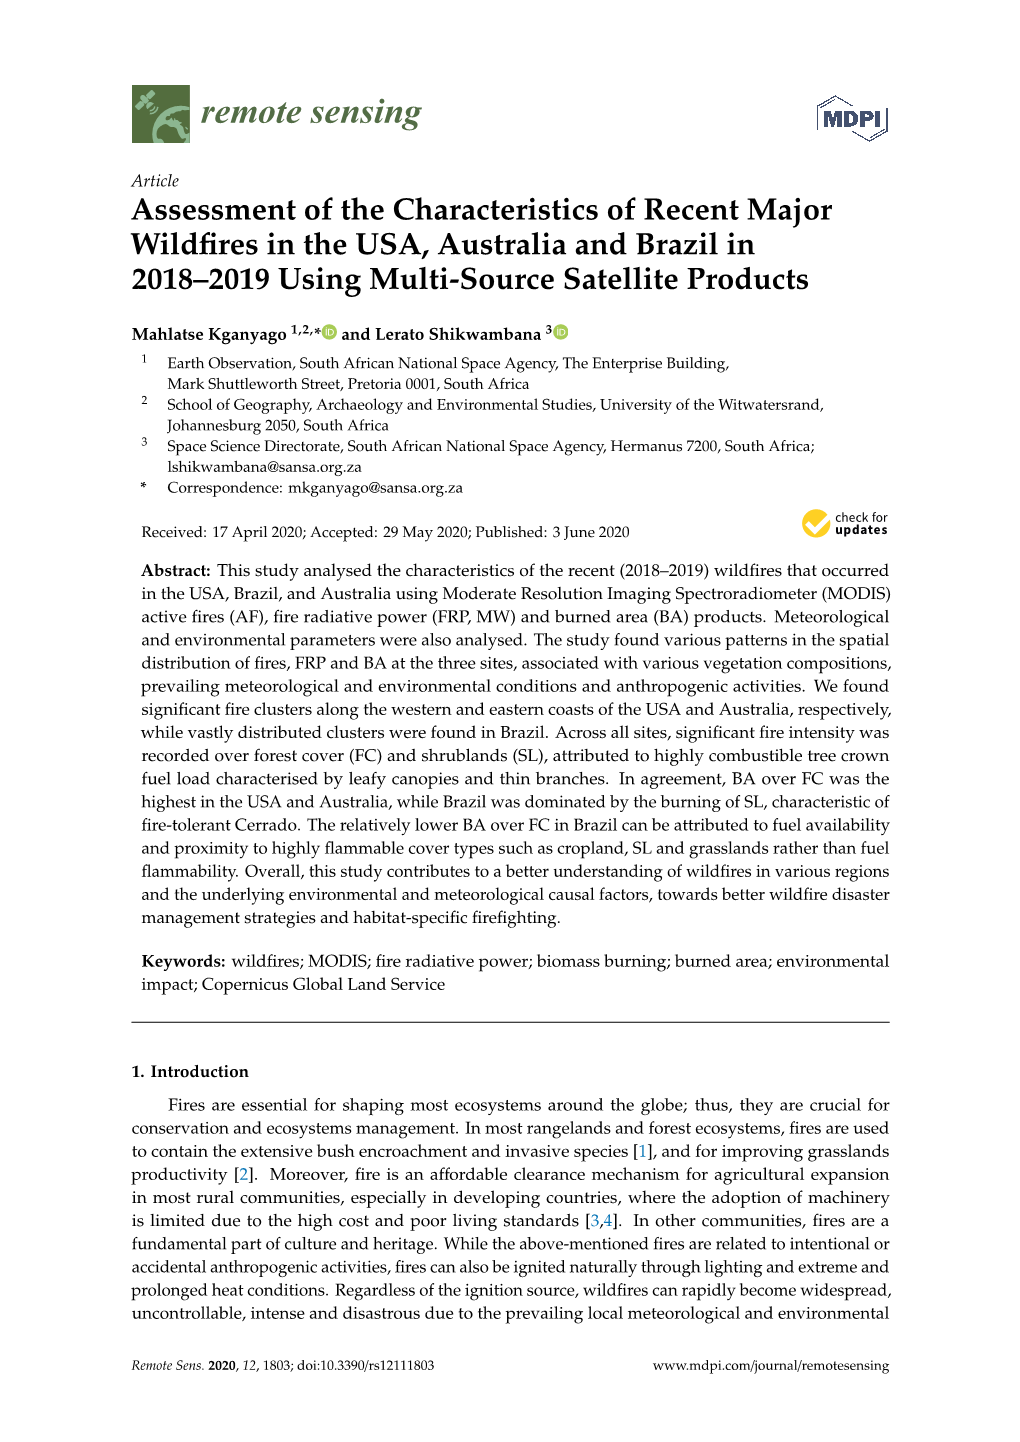 Assessment of the Characteristics of Recent Major Wildfires in the USA